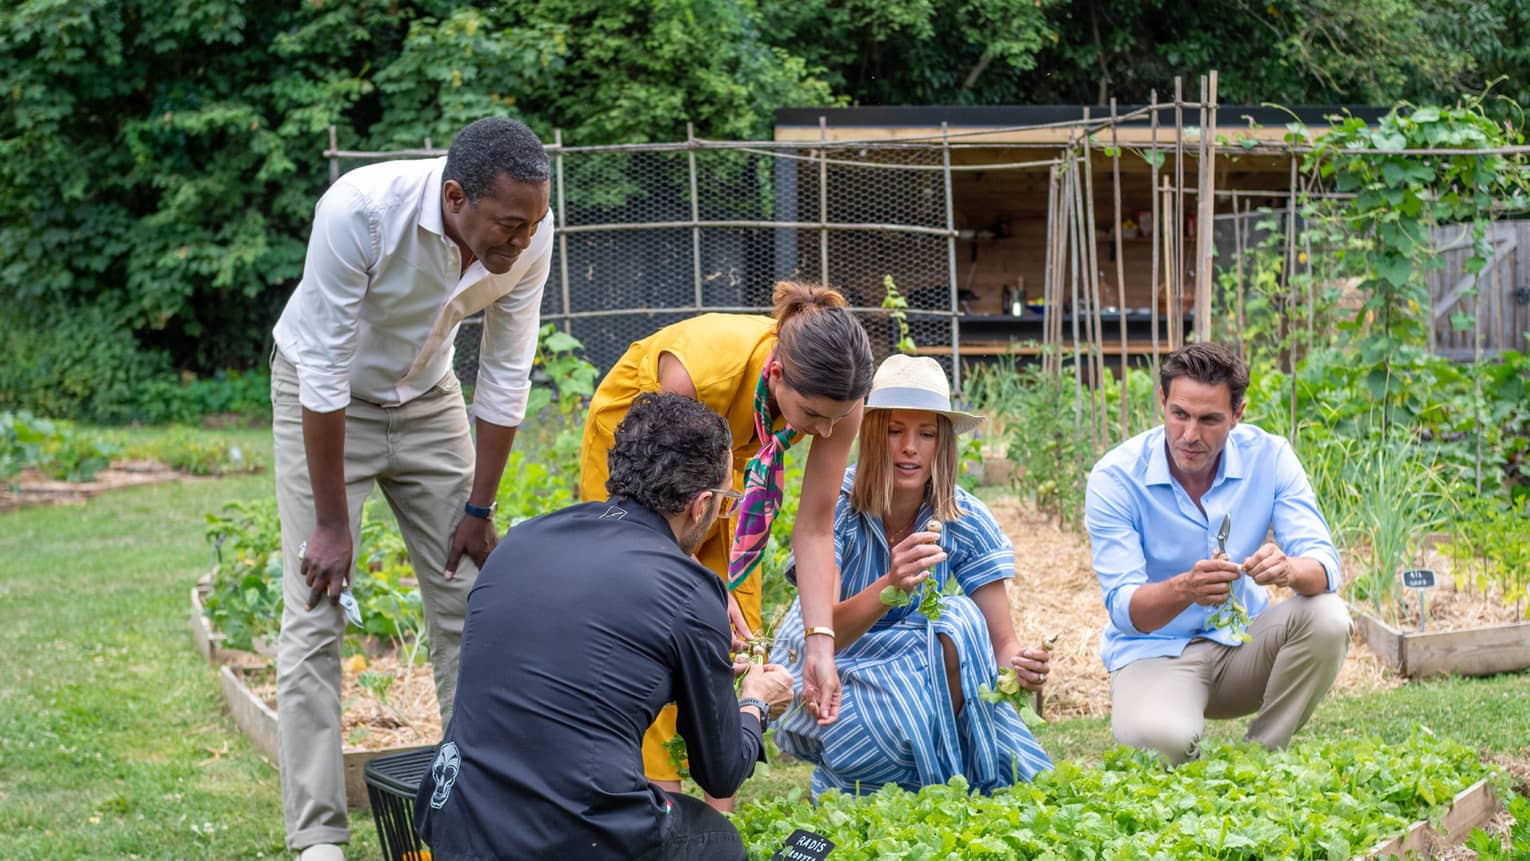 Men and woman examine herbs in a garden with a chef